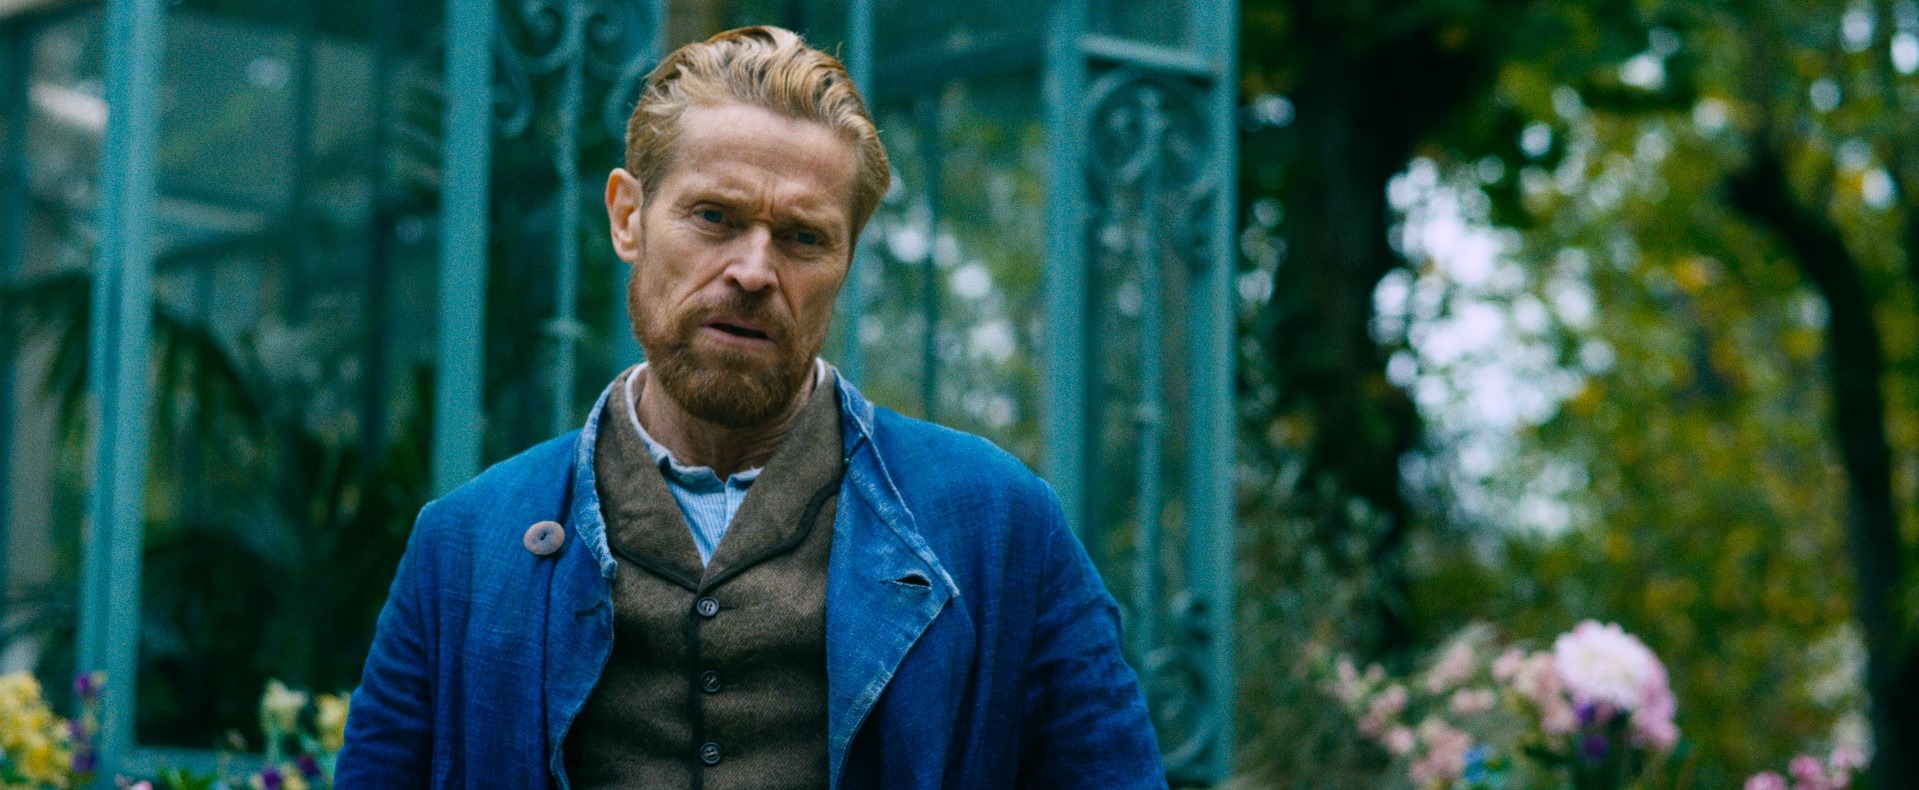 at eternity's gate best movies 2018 2019 oscar nominations winners interview vincent van gogh